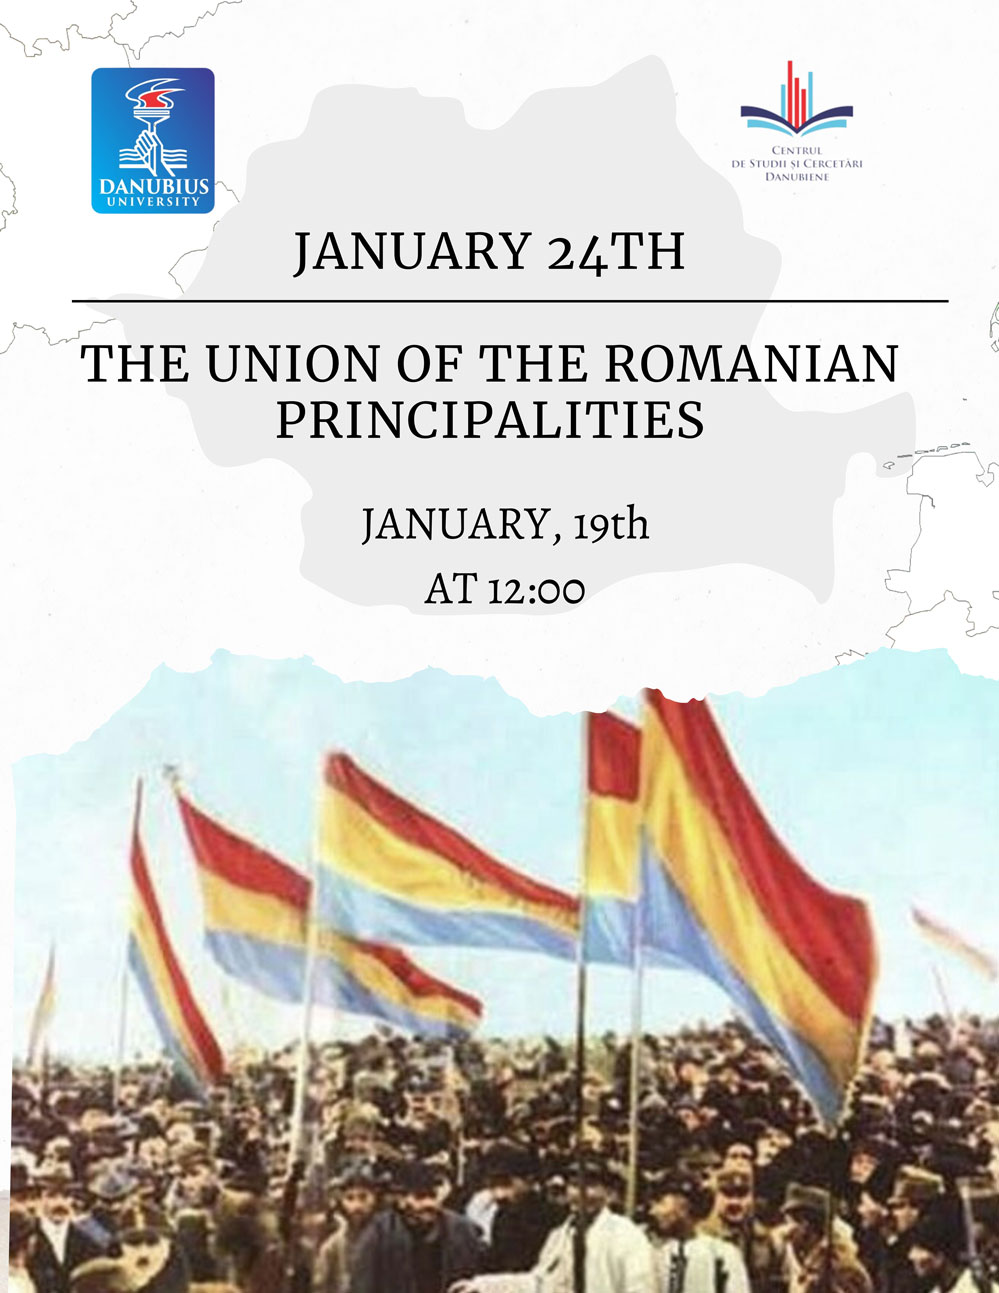 WORKSHOP - JANUARY 24TH – THE UNION OF THE ROMANIAN PRINCIPALITIES